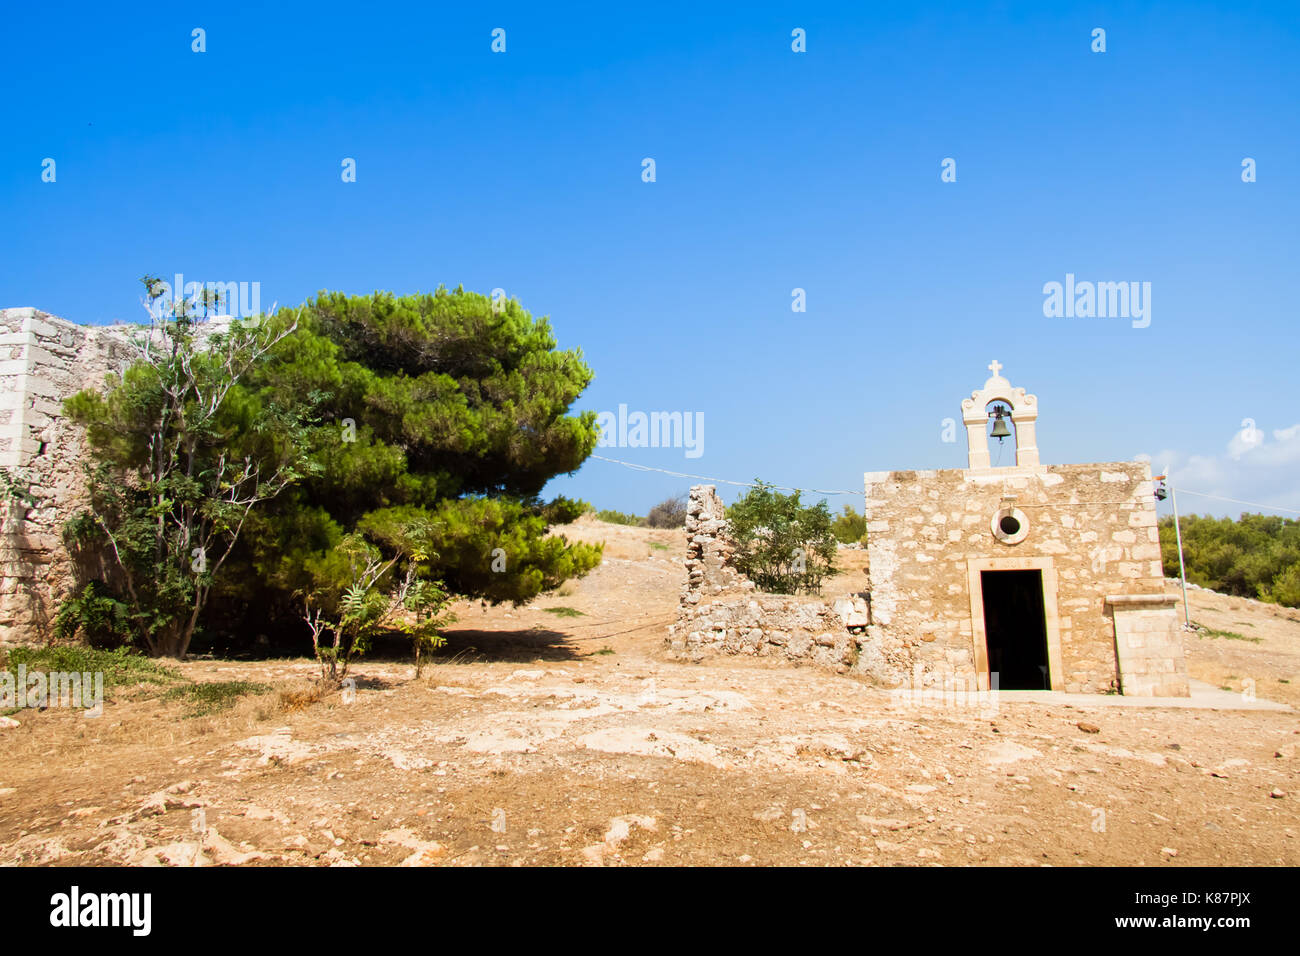 Orthodox church of St. Catherine (Agia Ekaterini) against the blue sky in the Fortress (Fortezza). Rethymno, Crete, Greece Stock Photo